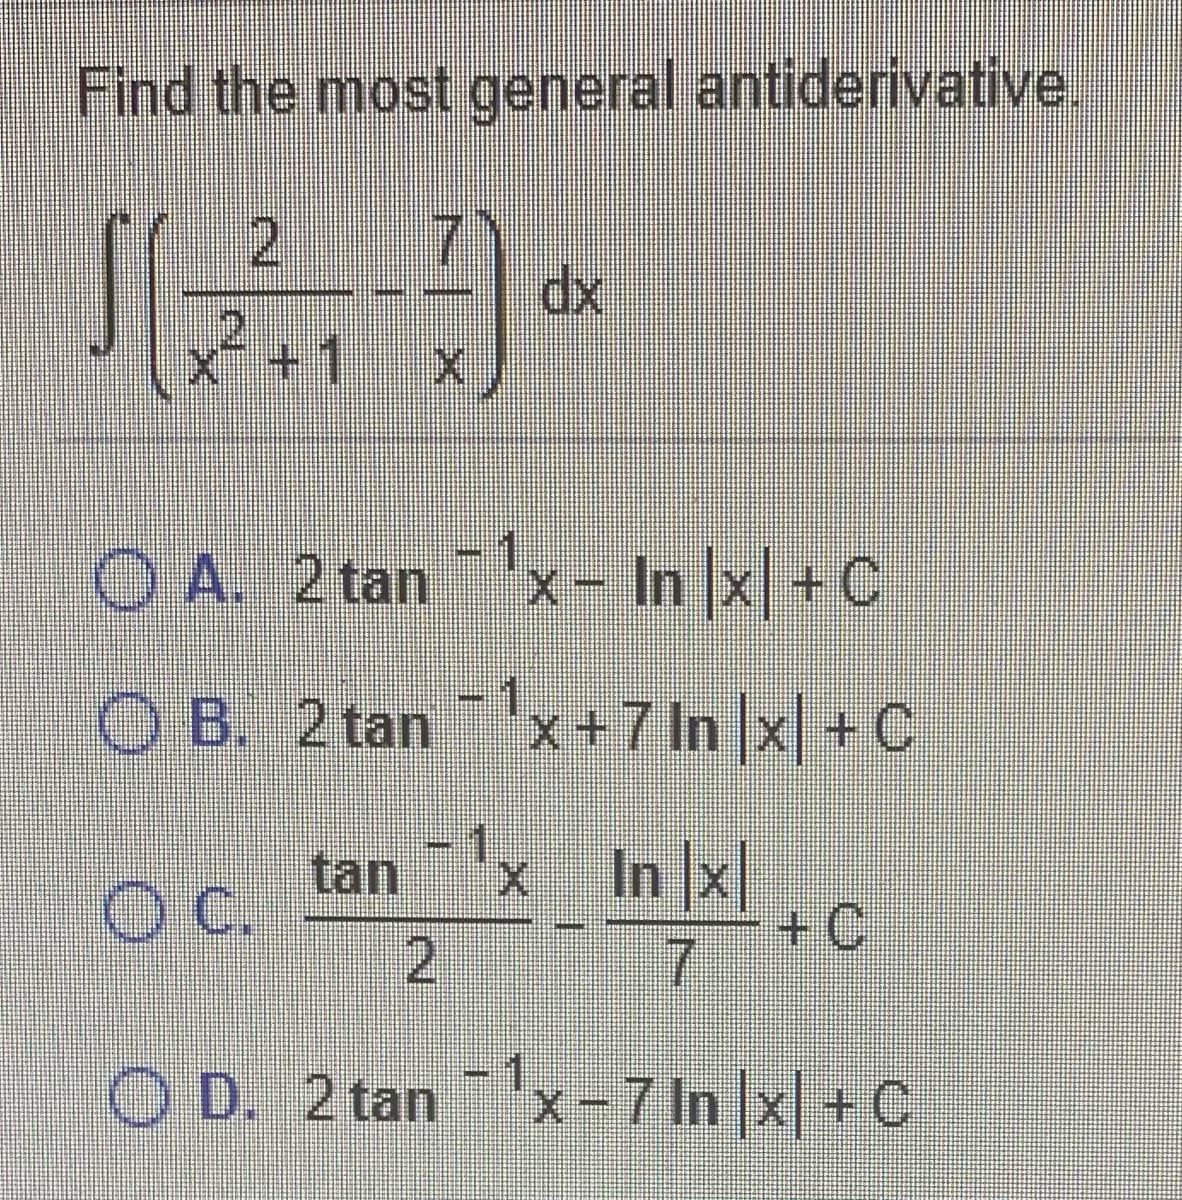 Find the most general antiderivative.
71
dx
x²+1
O A. 2 tan'x- In |x| + C
O B. 2tanx76 x +C
tan
C.
x In x
+C
7.
O D. 2 tan'x -7 In |x| +C
